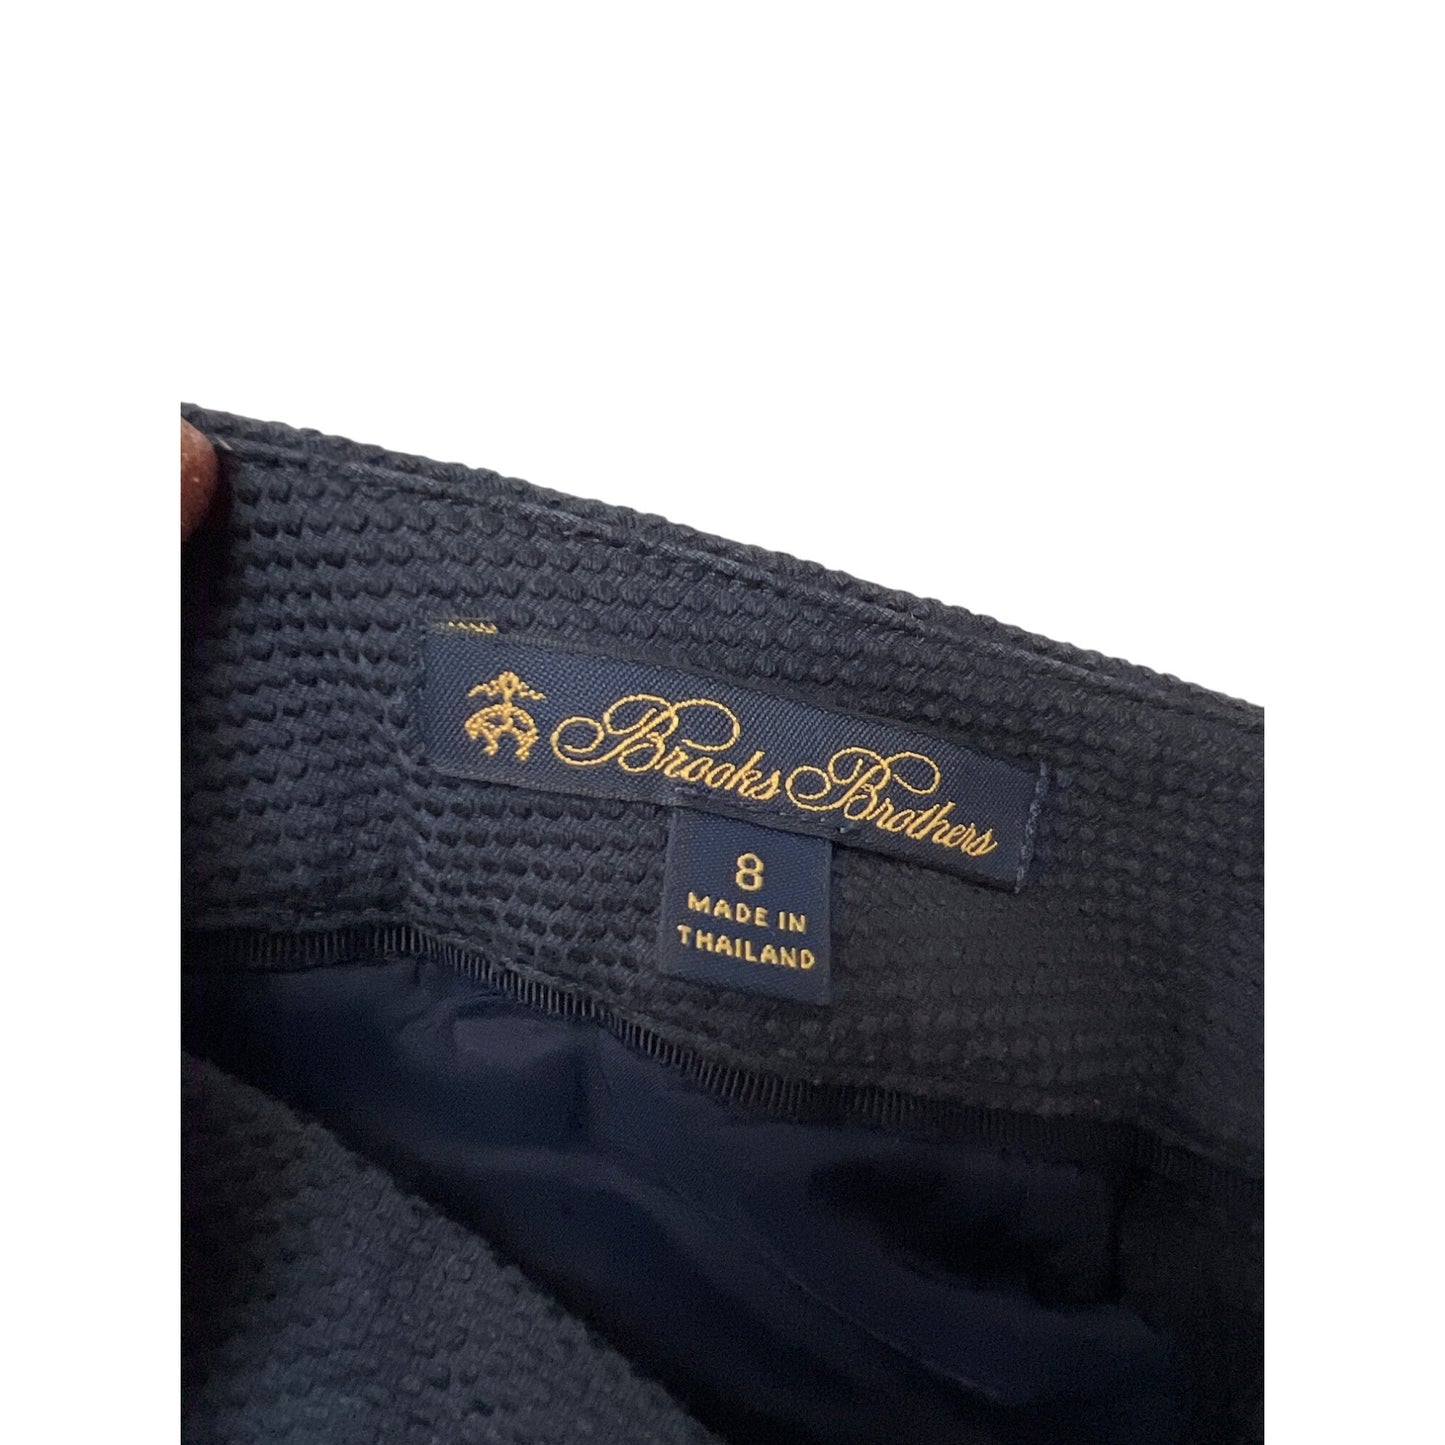 Brooks Brothers Textured Navy Blue Chino Cropped Pants